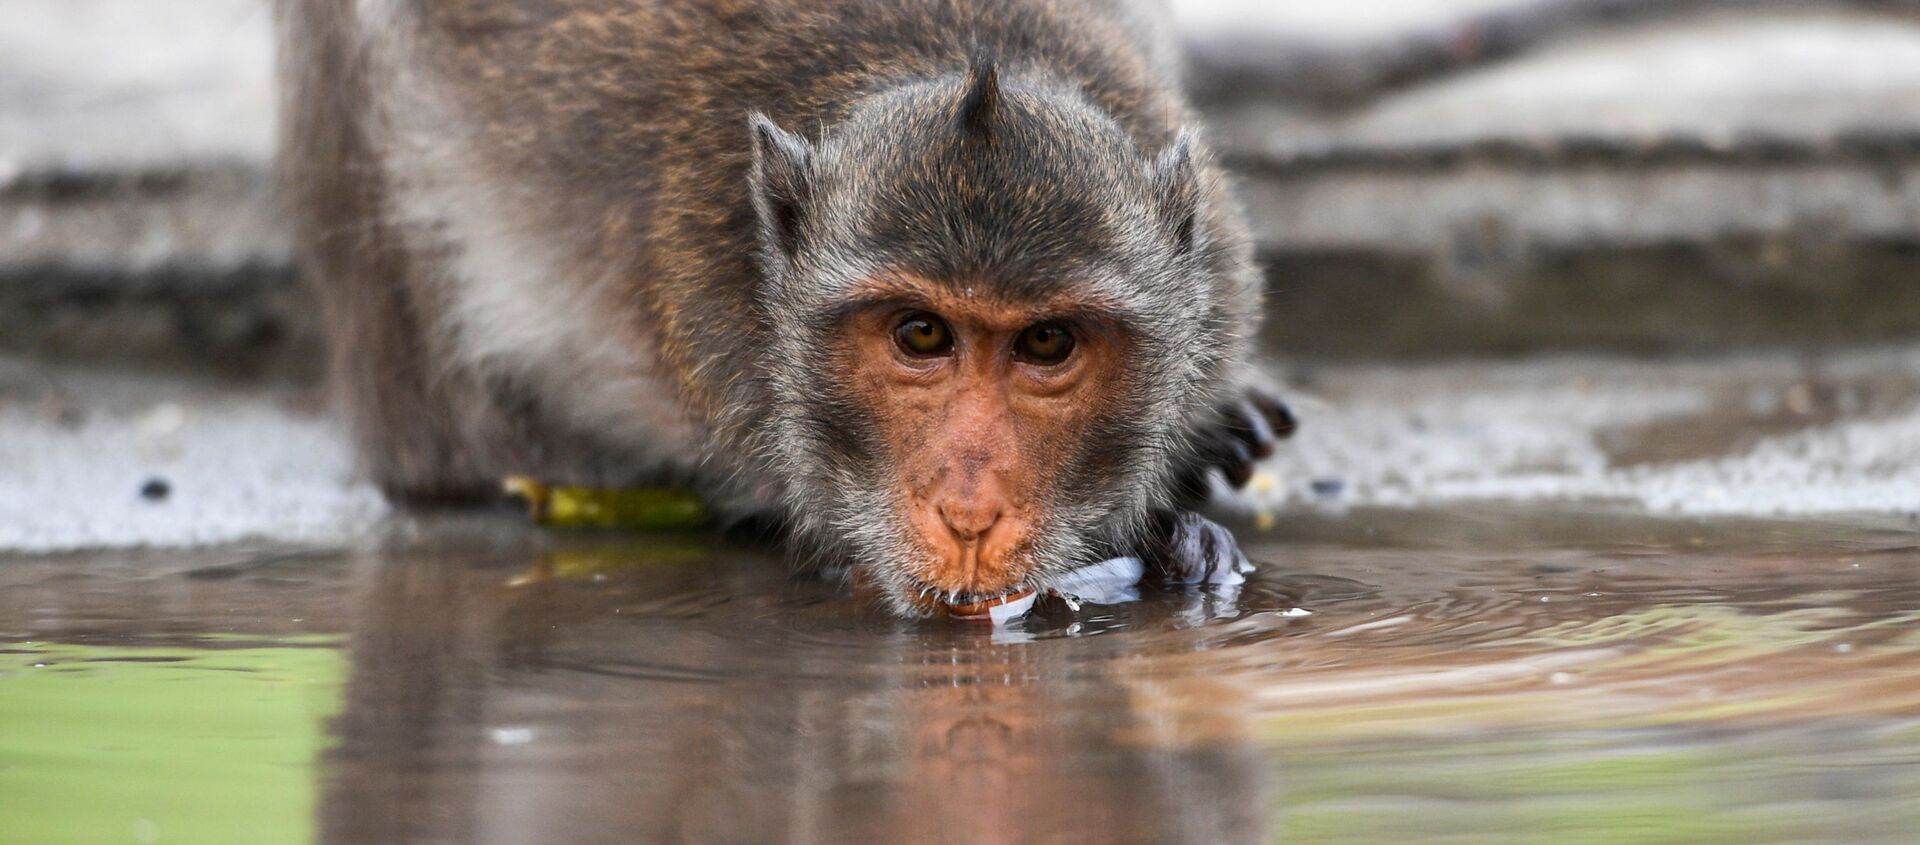 A long-tailed macaque drinks water in a mangrove near Bang Khun Thian on World Water Day at the outskirts of Bangkok, Thailand March 22, 2021. - Sputnik International, 1920, 16.04.2021